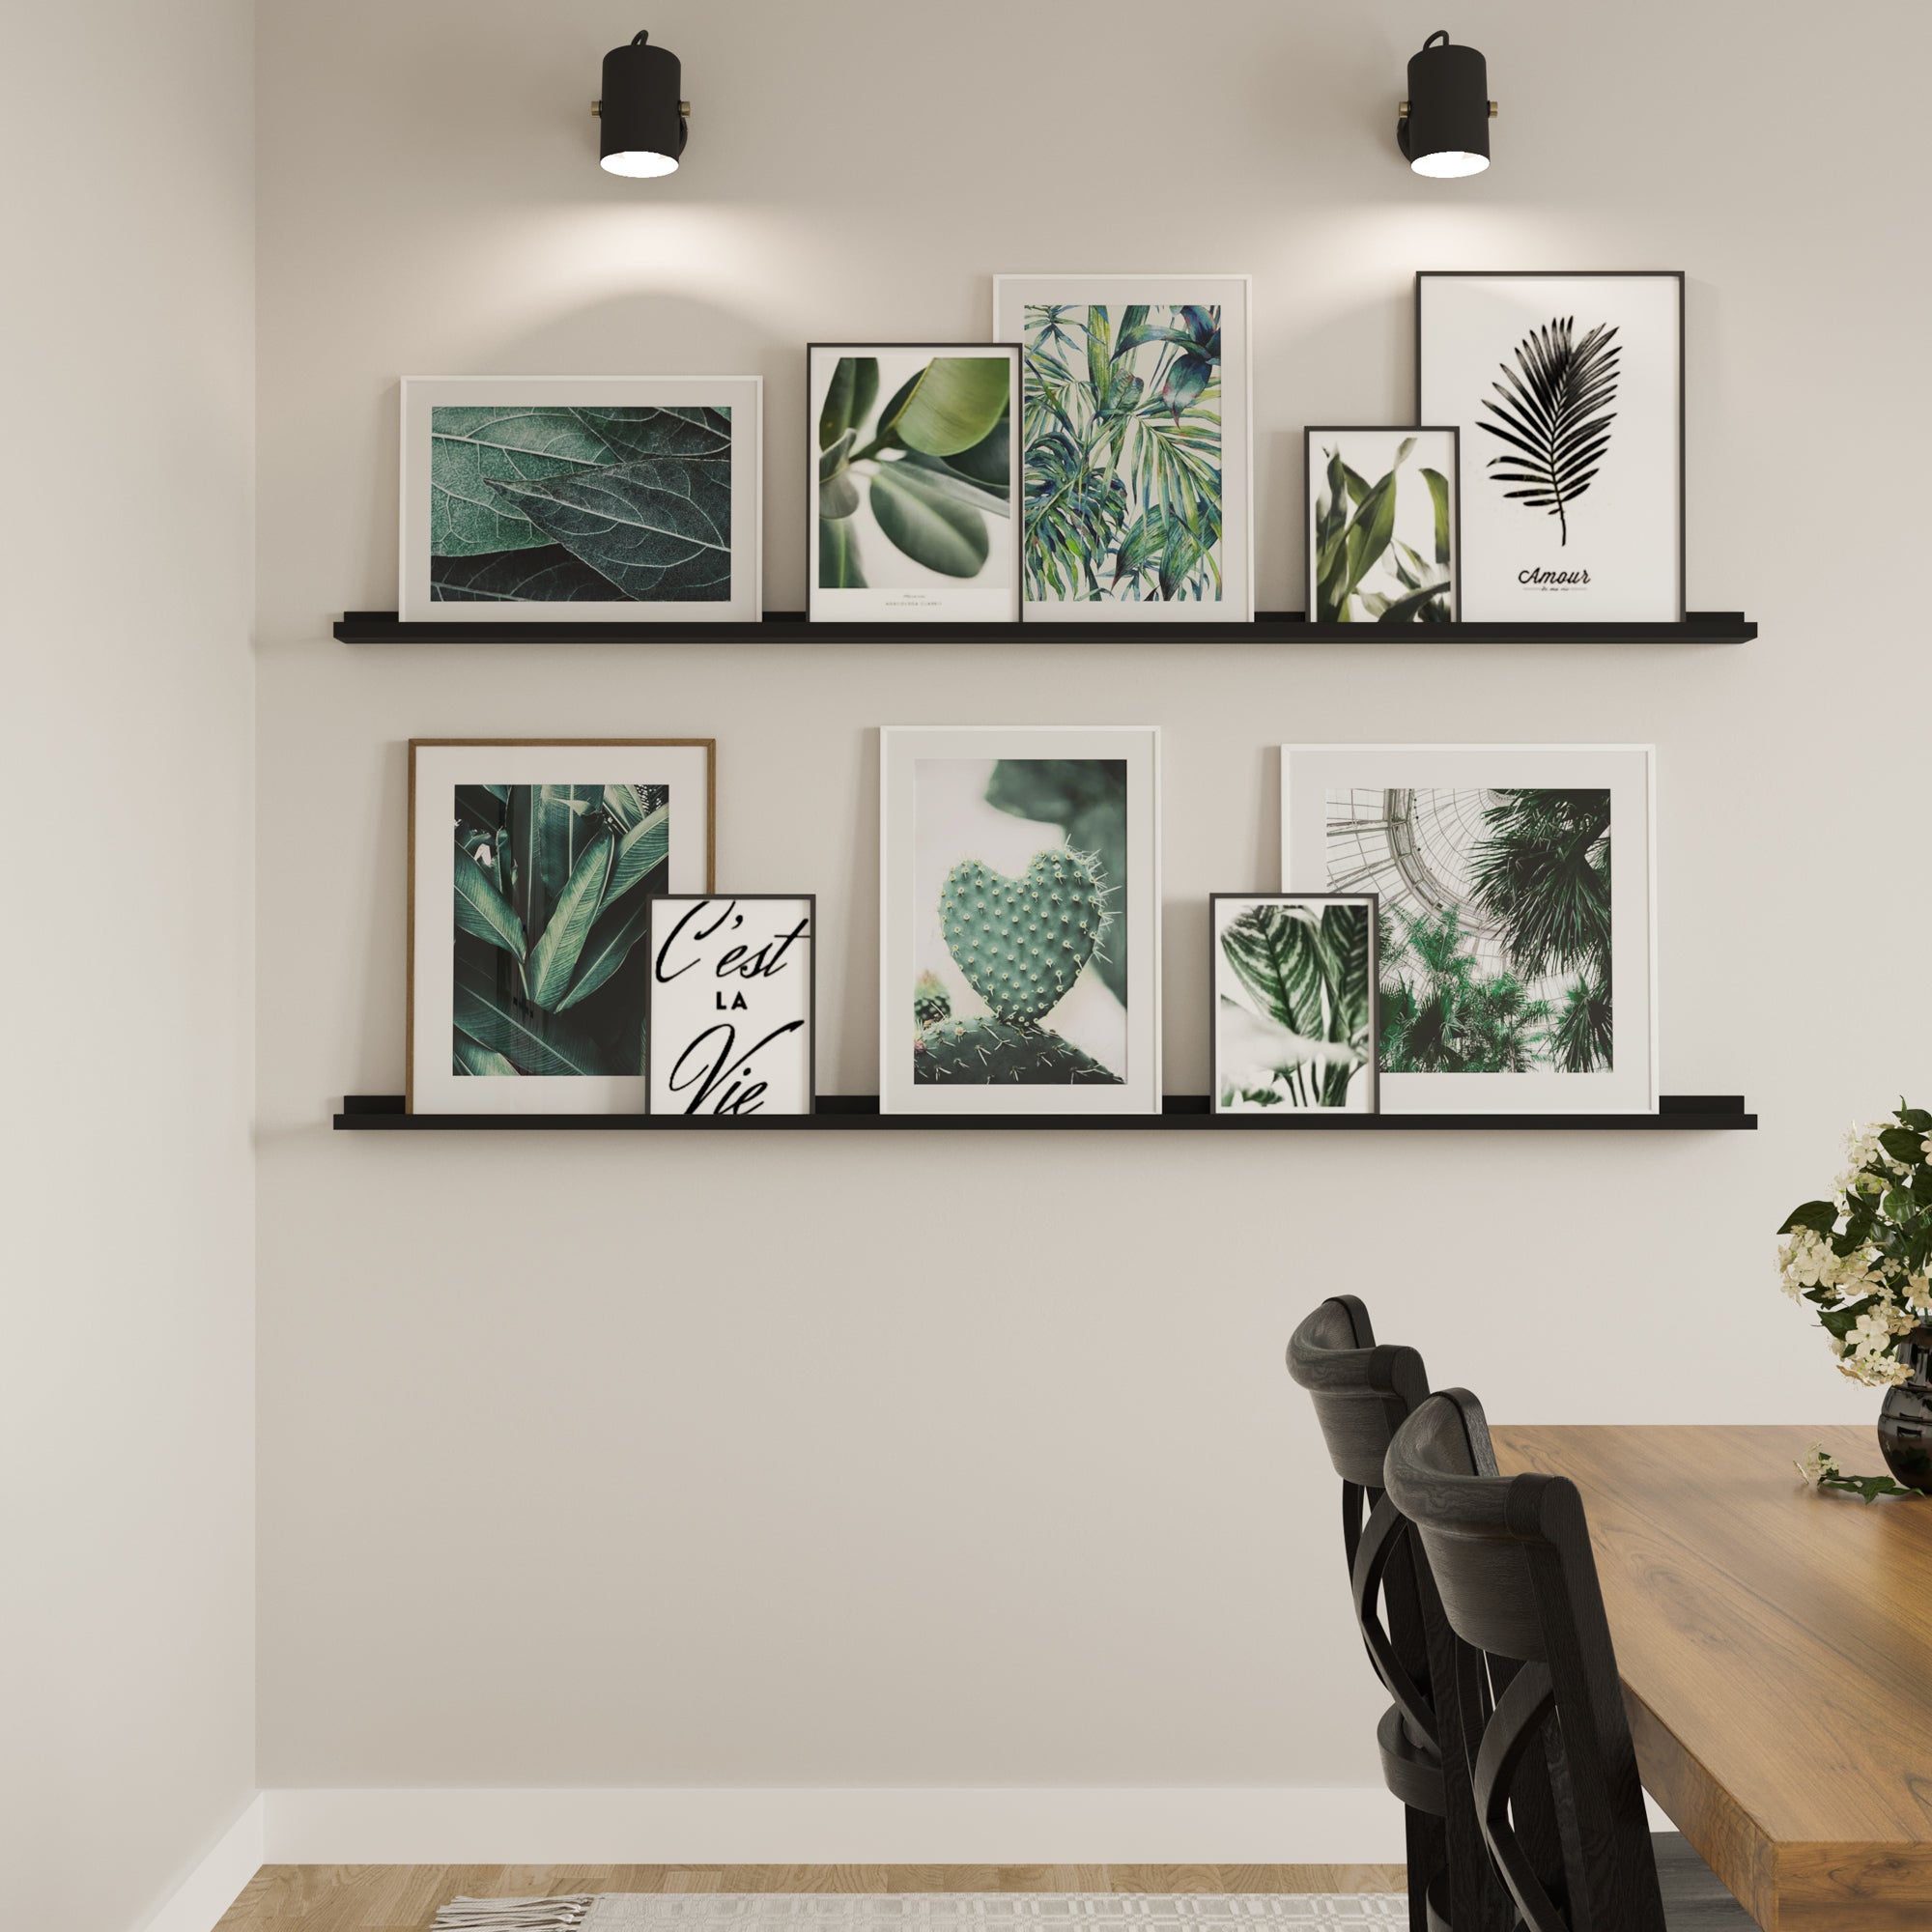  A dining area featuring two floating shelves black on the wall, adorned with framed botanical art prints, creating a serene atmosphere.